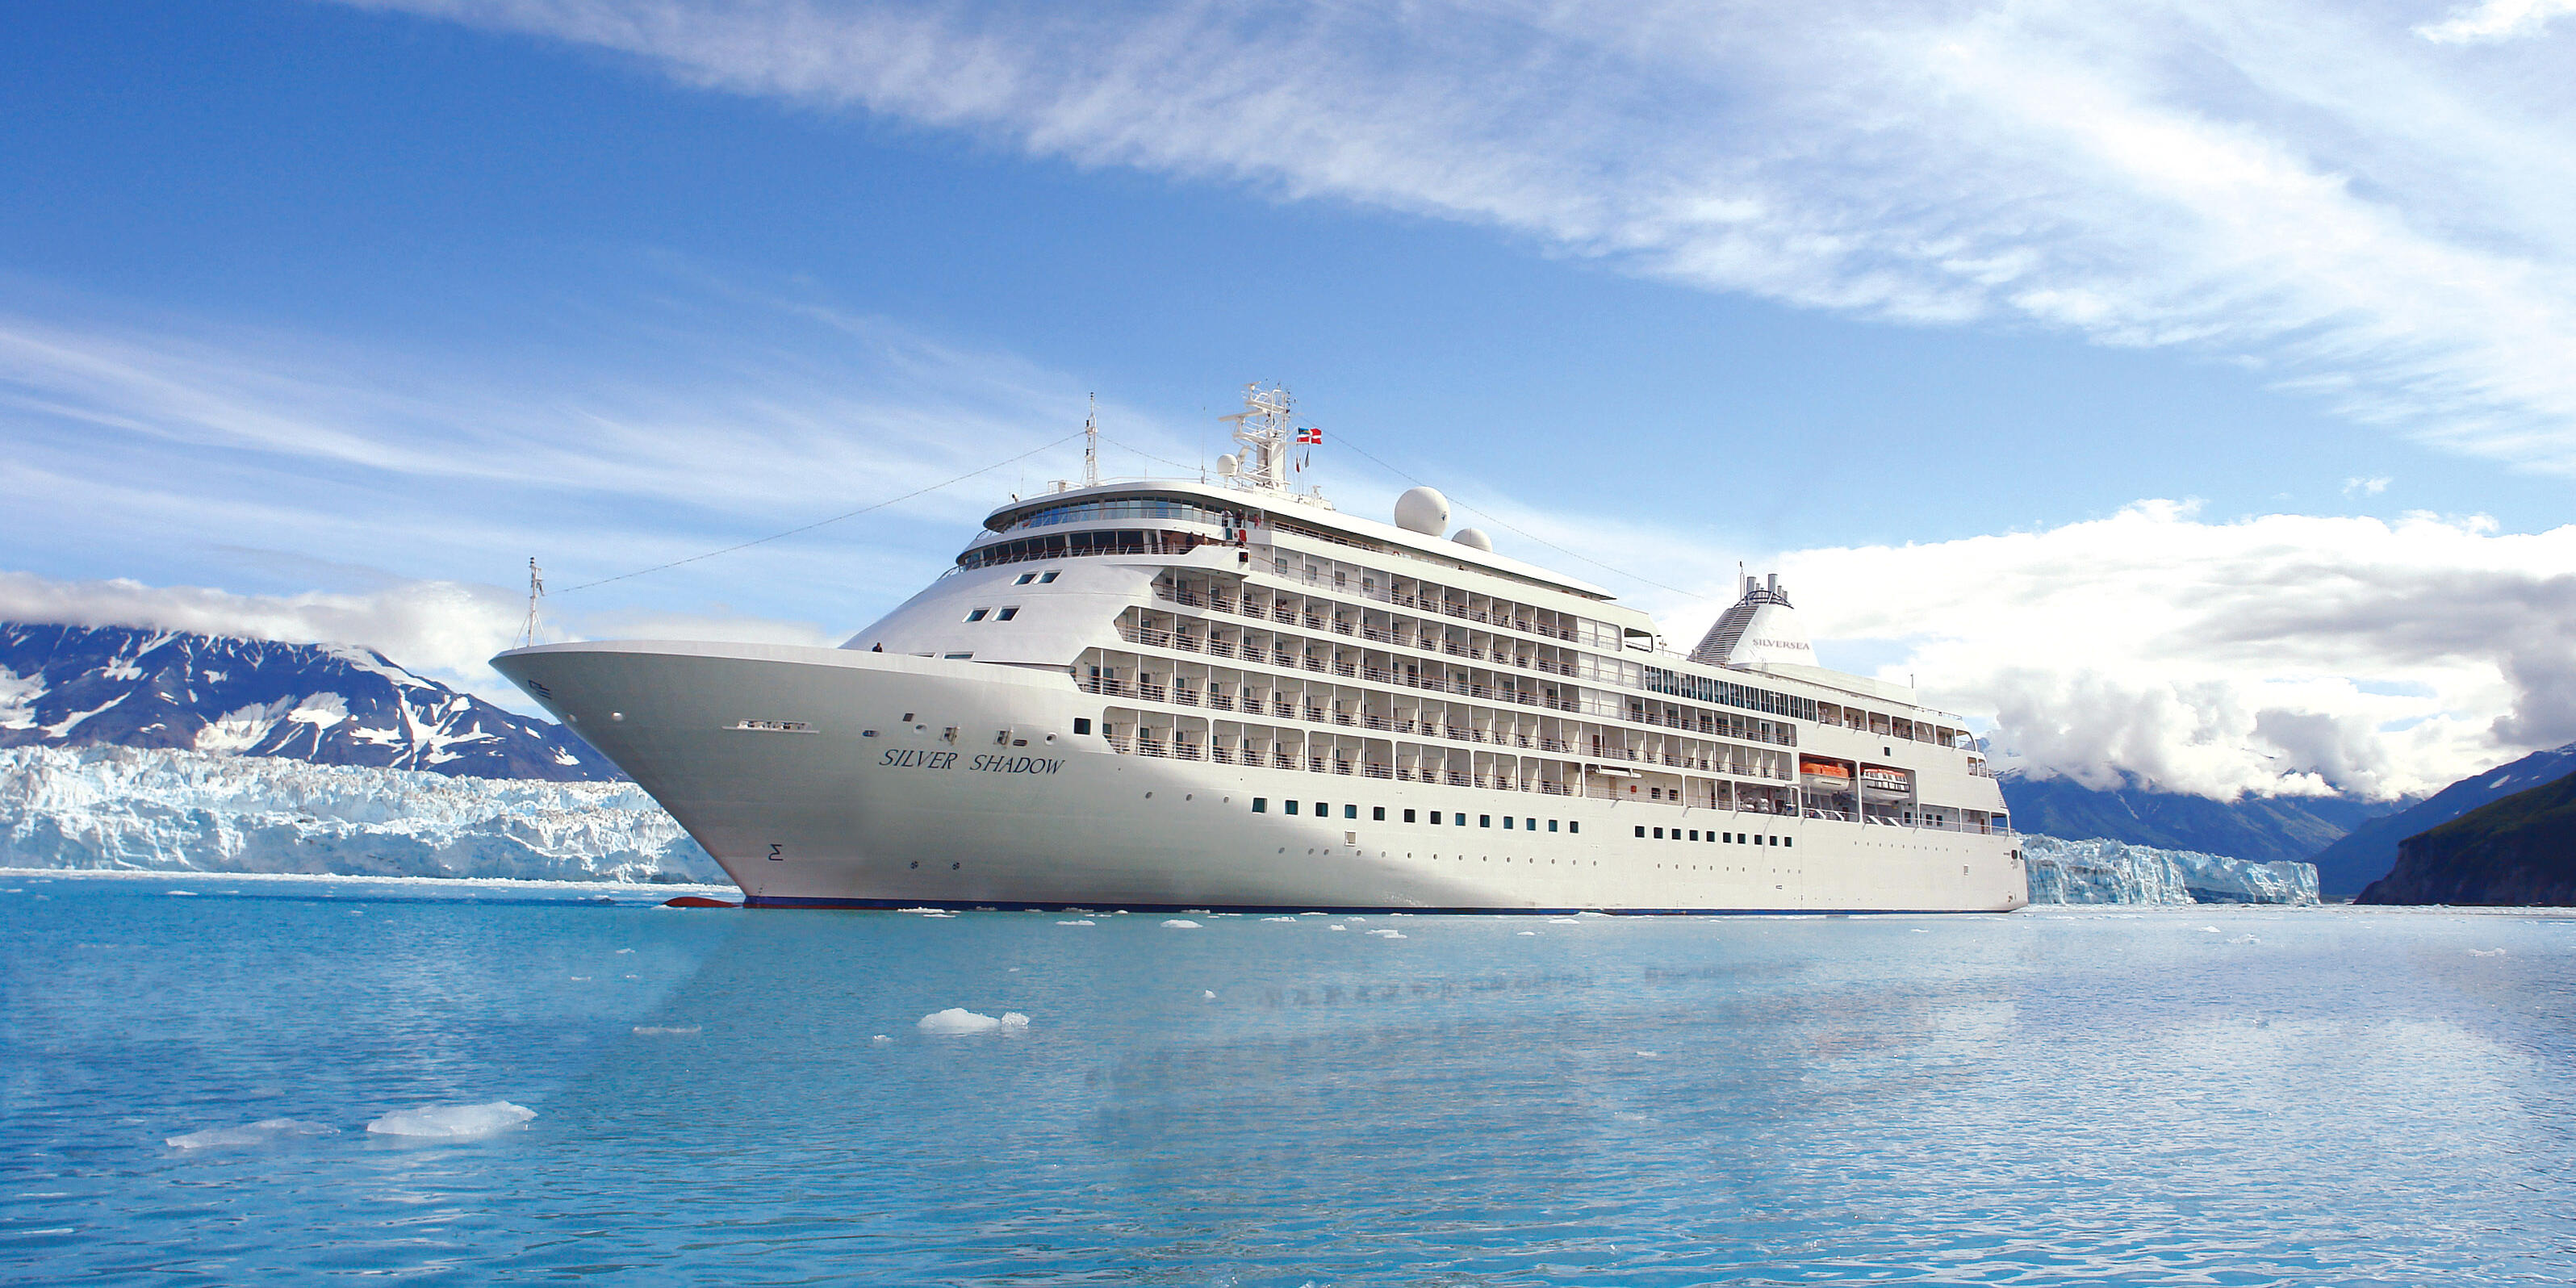 Cruise lines report record demand for new, future cruises